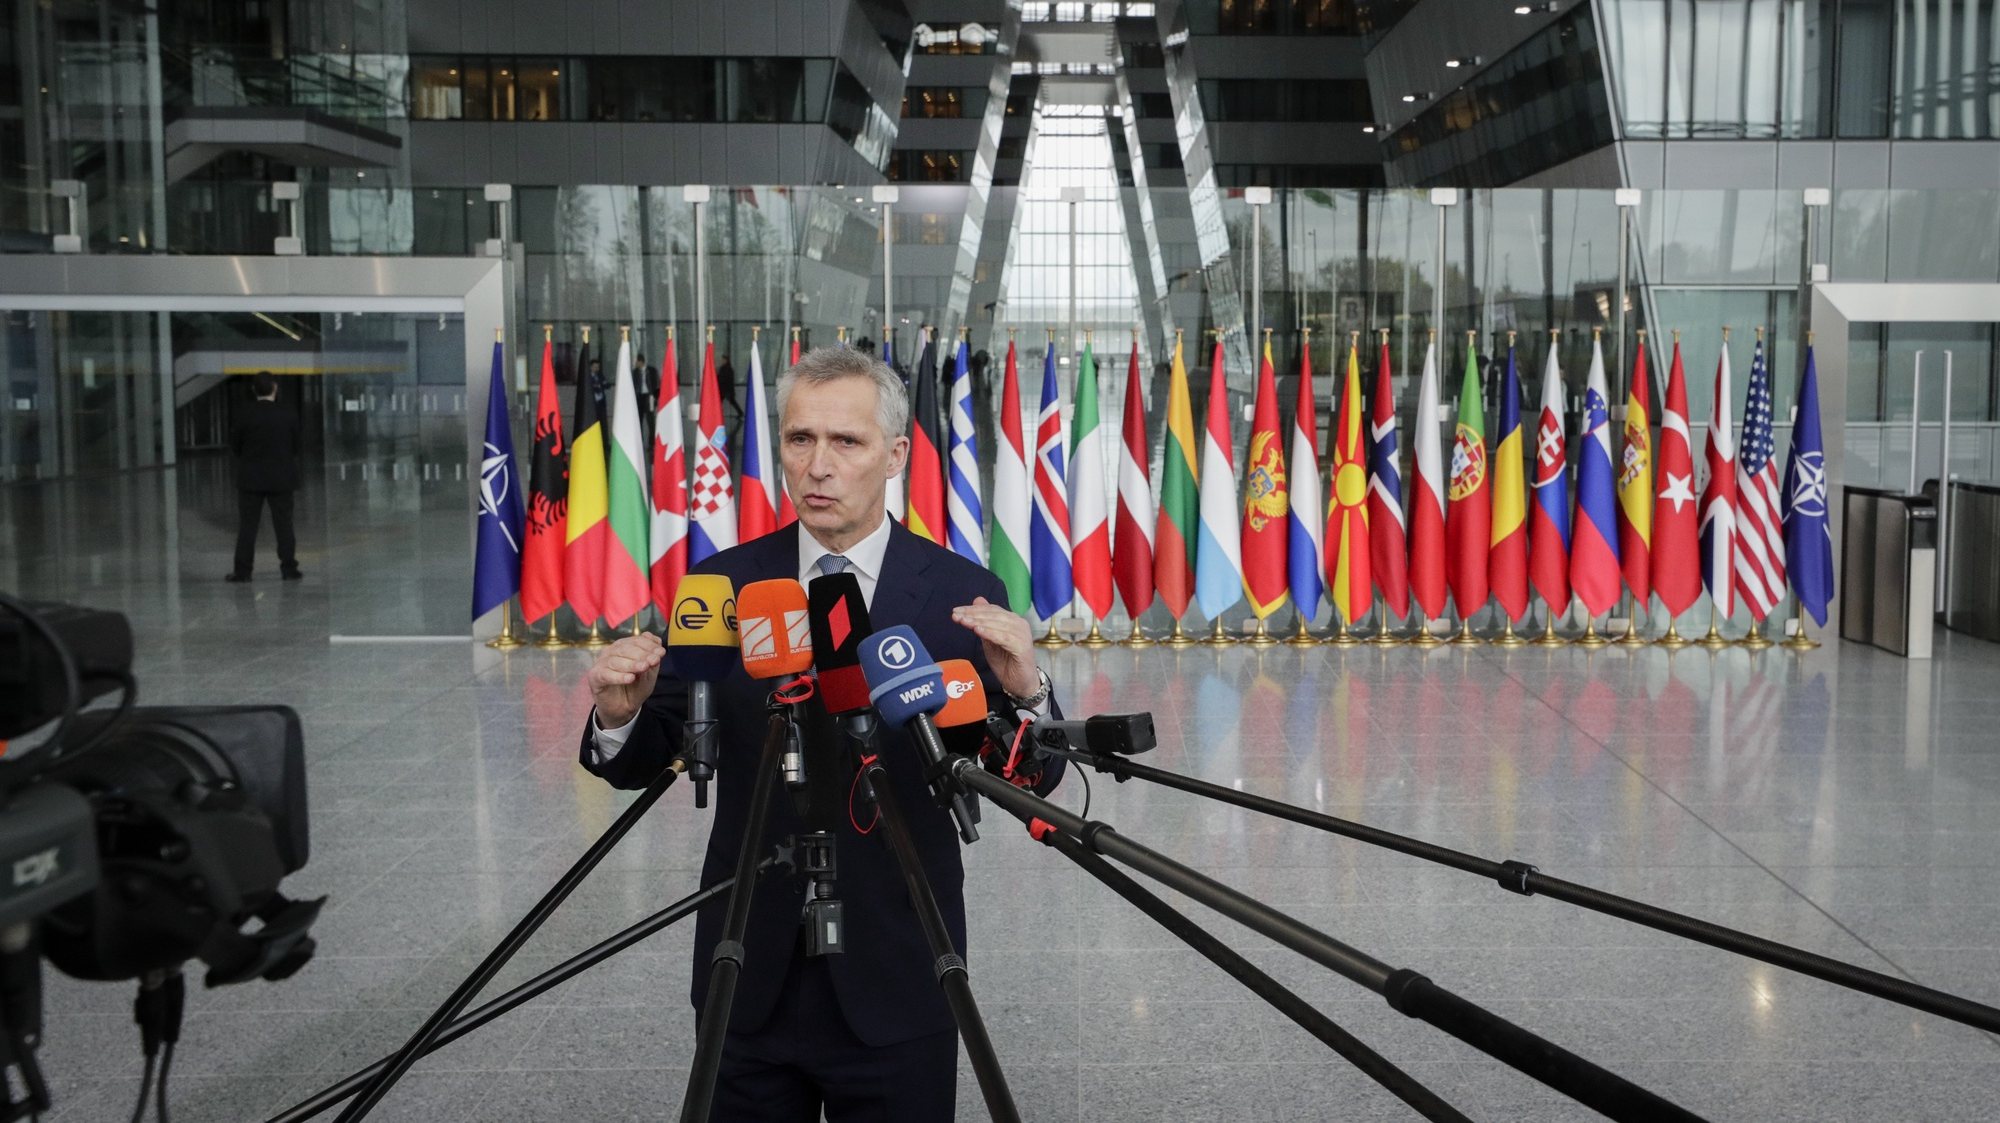 epa09873661 NATO Secretary General Jens Stoltenberg gives a press conference ahead of a special meeting of NATO Ministers of Foreign Affairs on the Ukraine Crisis in Brussels, Belgium, 06 April 2022. NATO Ministers of Foreign Affairs will attend a working dinner on the evening of 06 April, and a second day of meetings on 07 April.  EPA/OLIVIER HOSLET